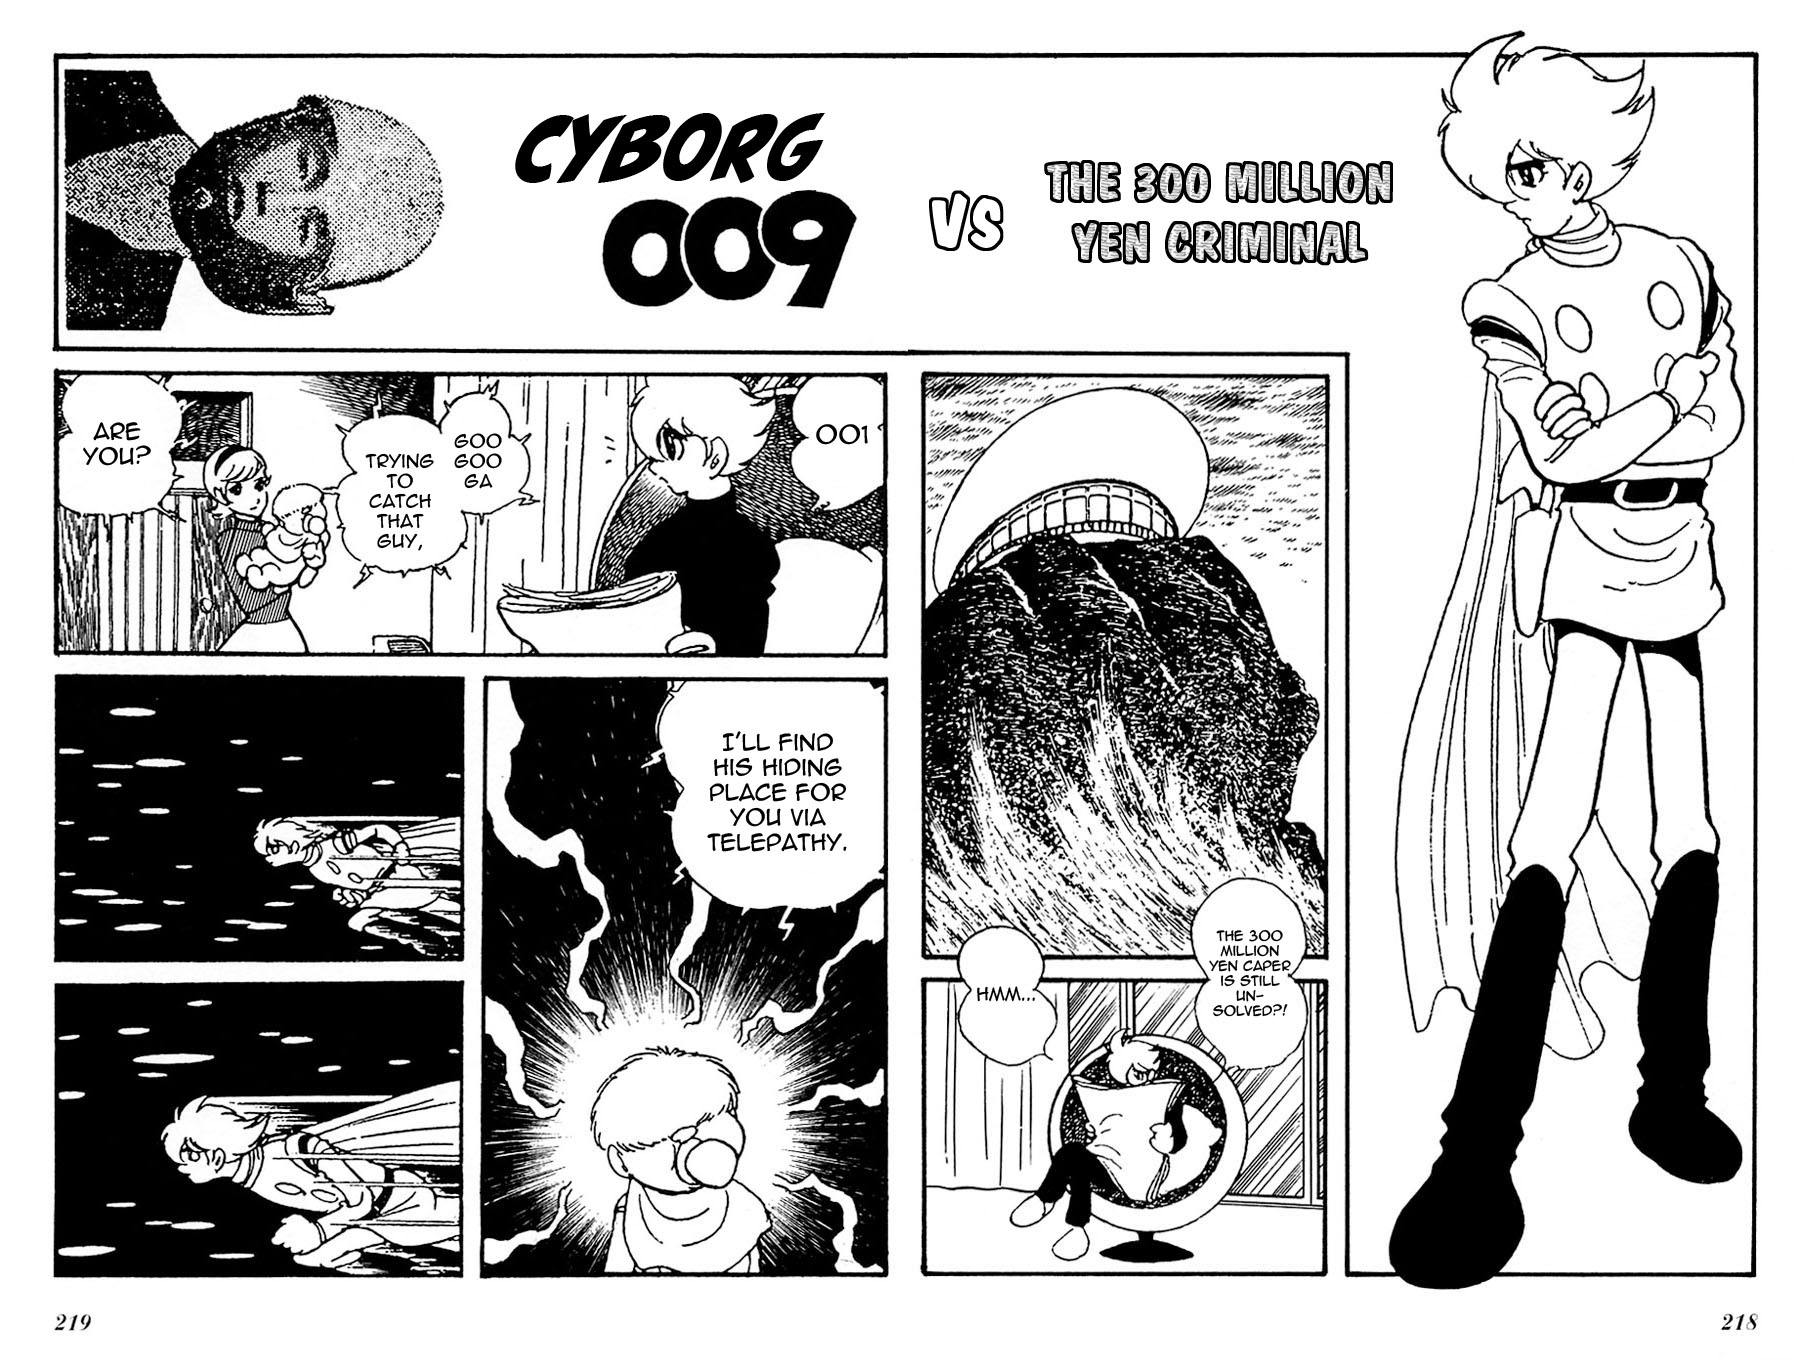 Cyborg 009: Angels Vol.1 Chapter 8 : Cyborg 009 And The 300 Million Yen Criminal - Picture 2